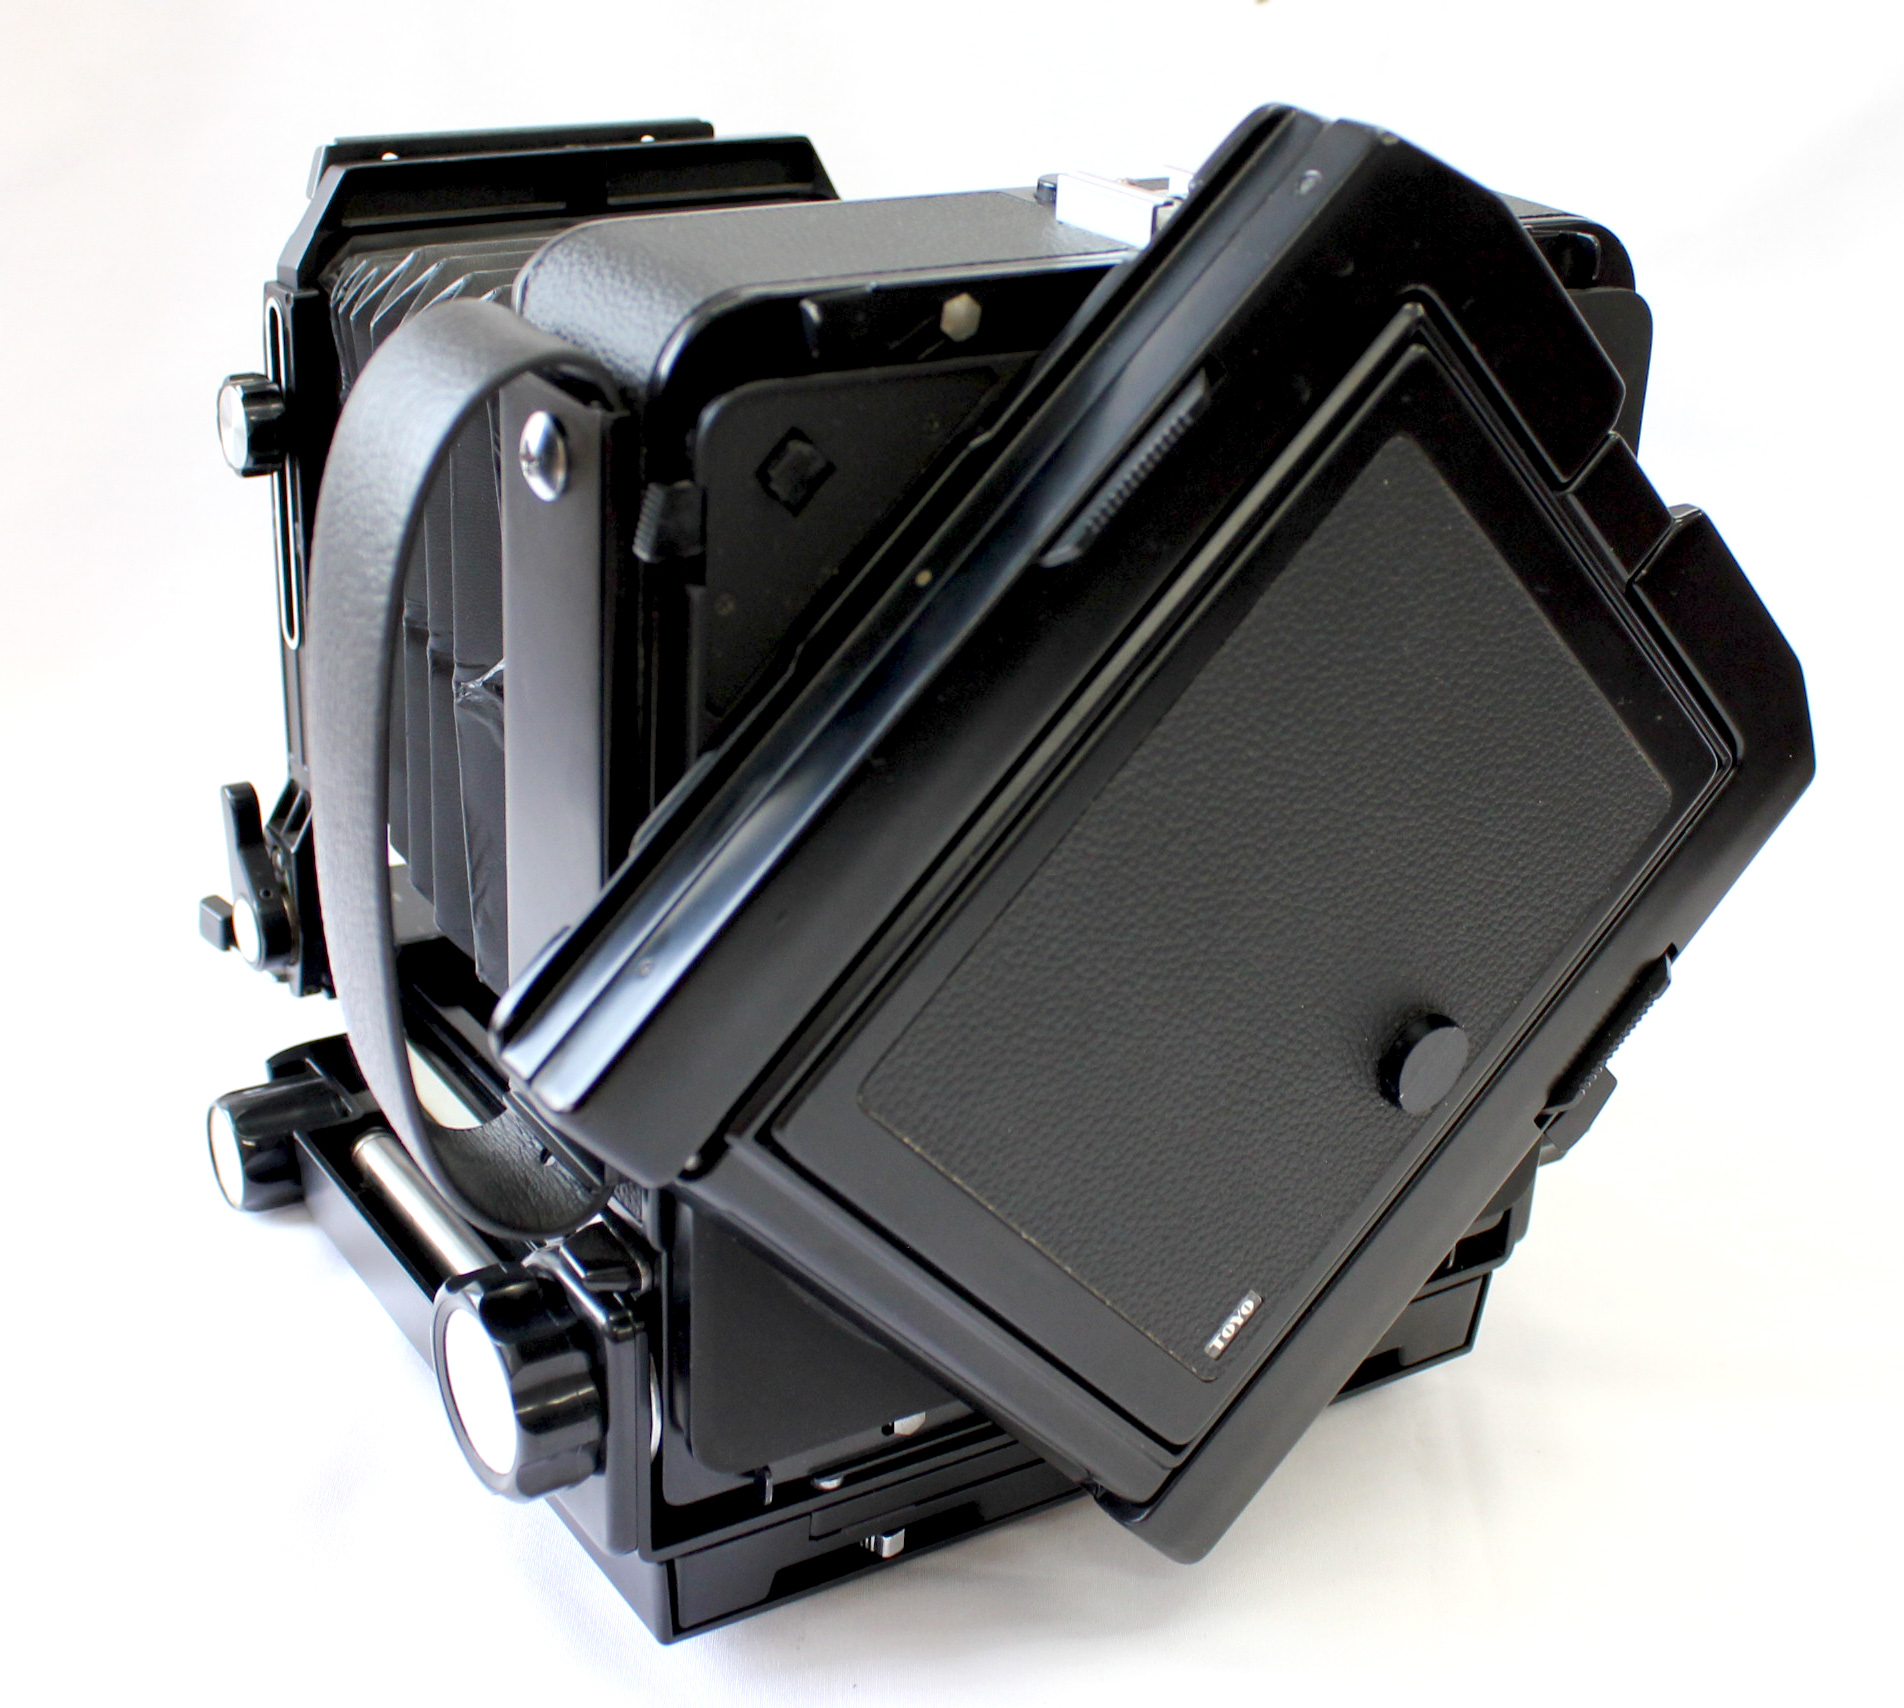  Toyo Field 45A 4x5 Large Format Film Camera with Revolving Back and 3 Cut Film Holders from Japan Photo 10